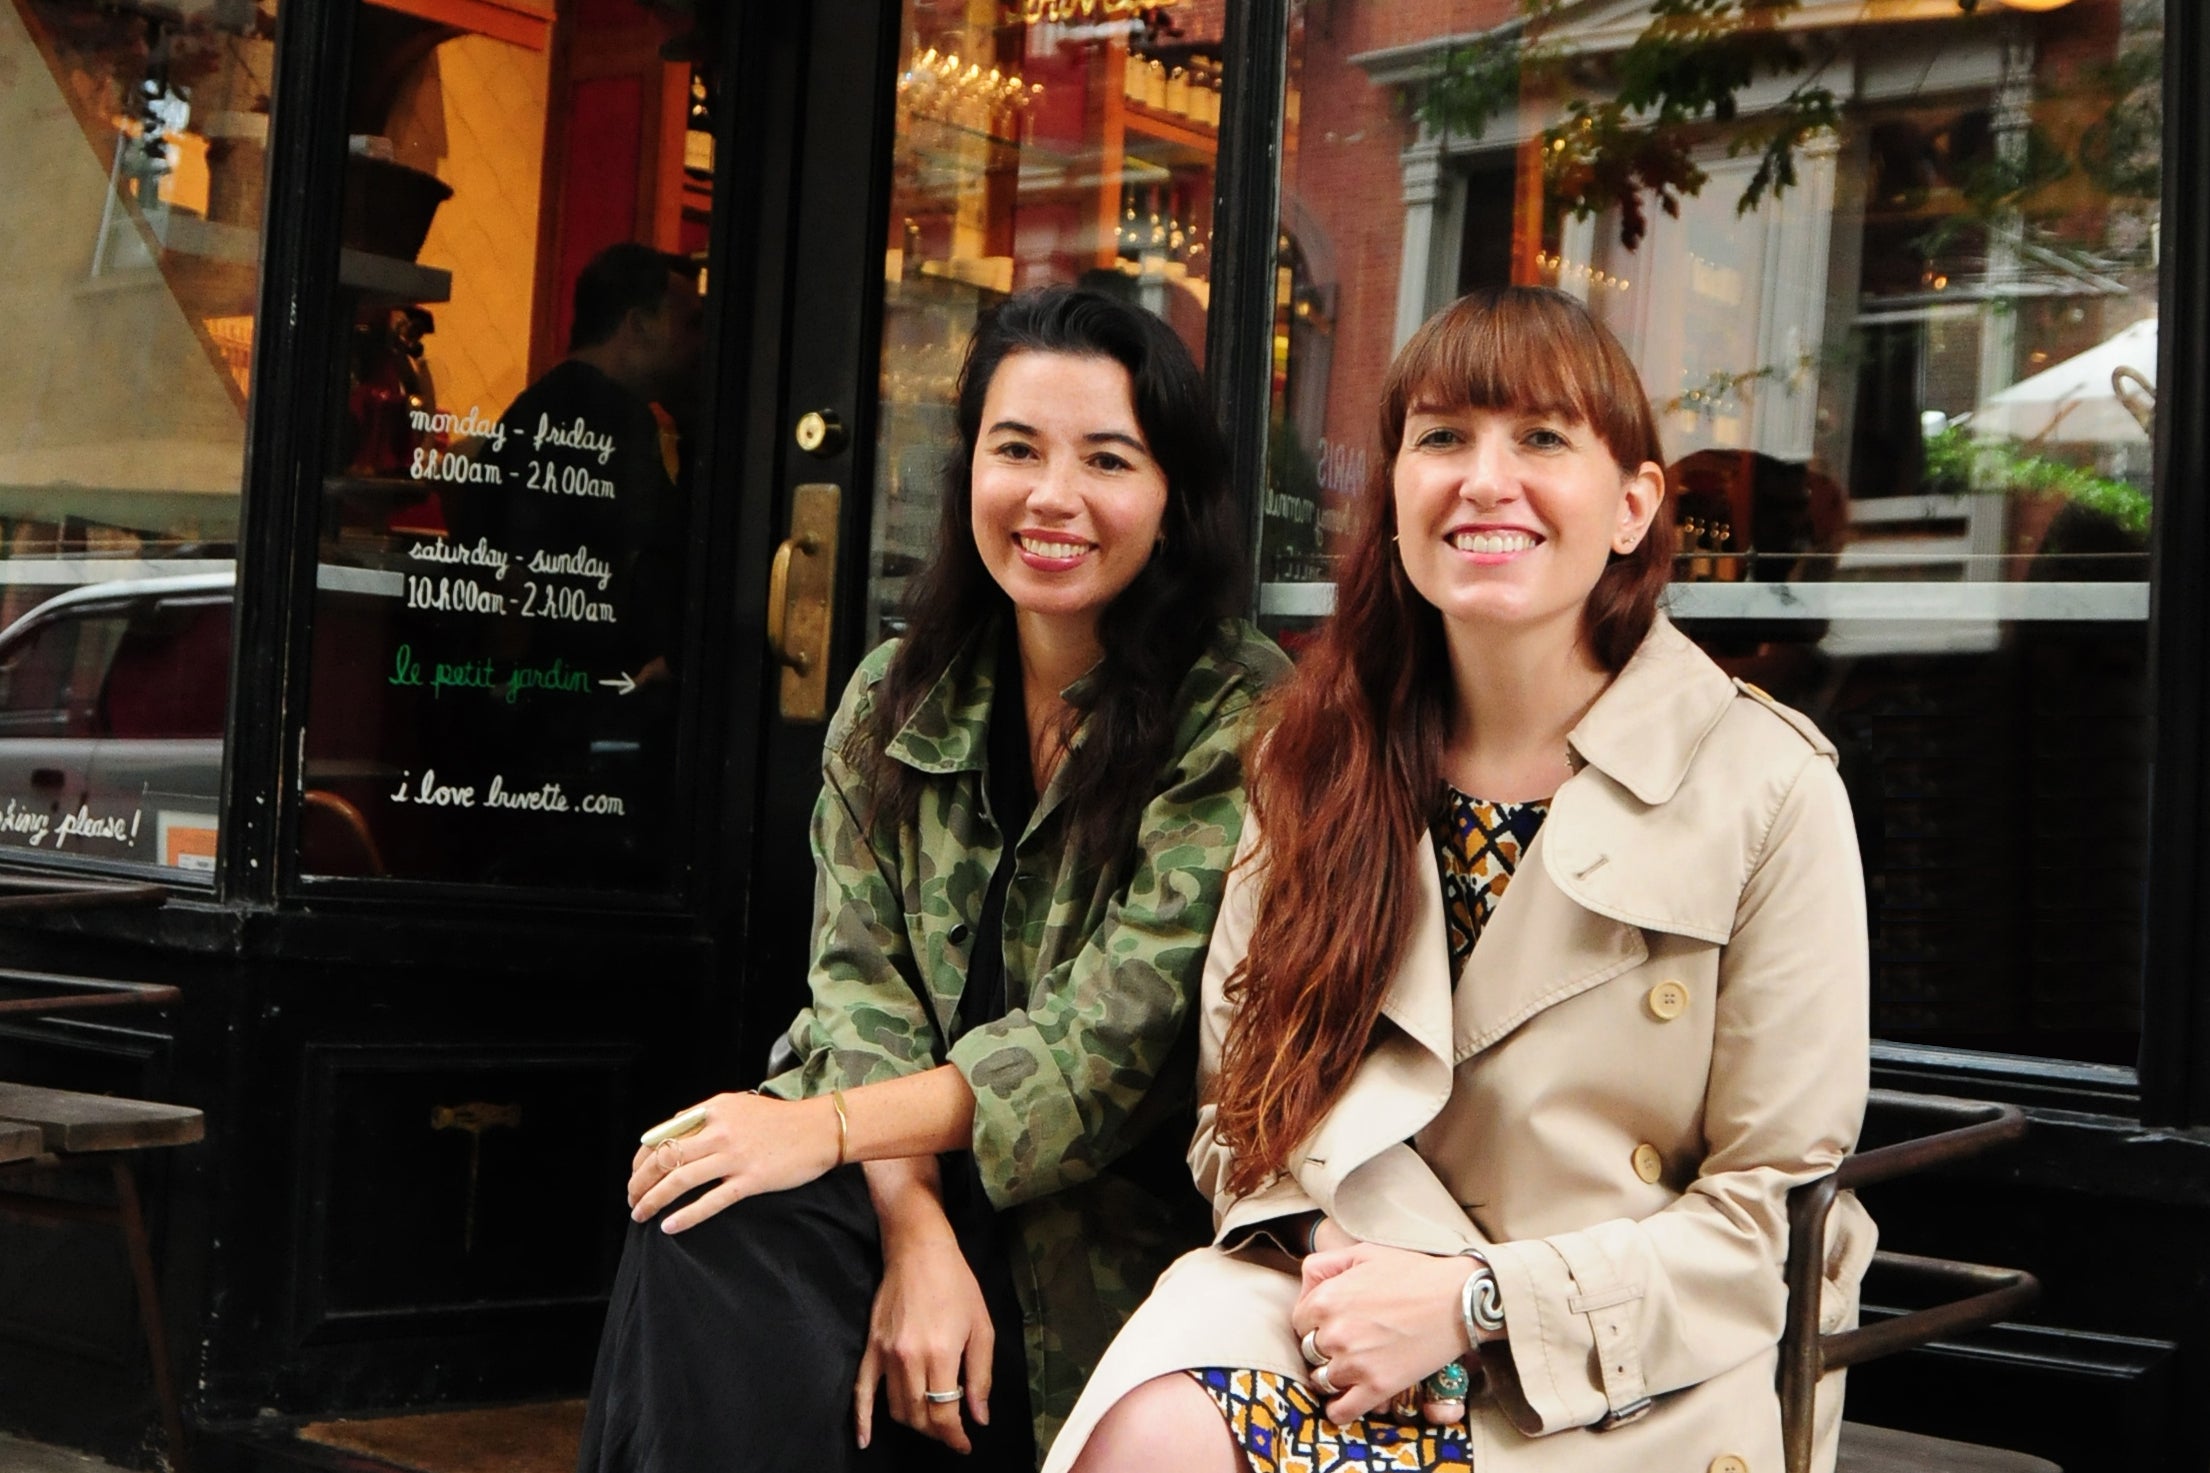 Michele Outland and Fiorella Valdesolo, co-founders, Gather Journal